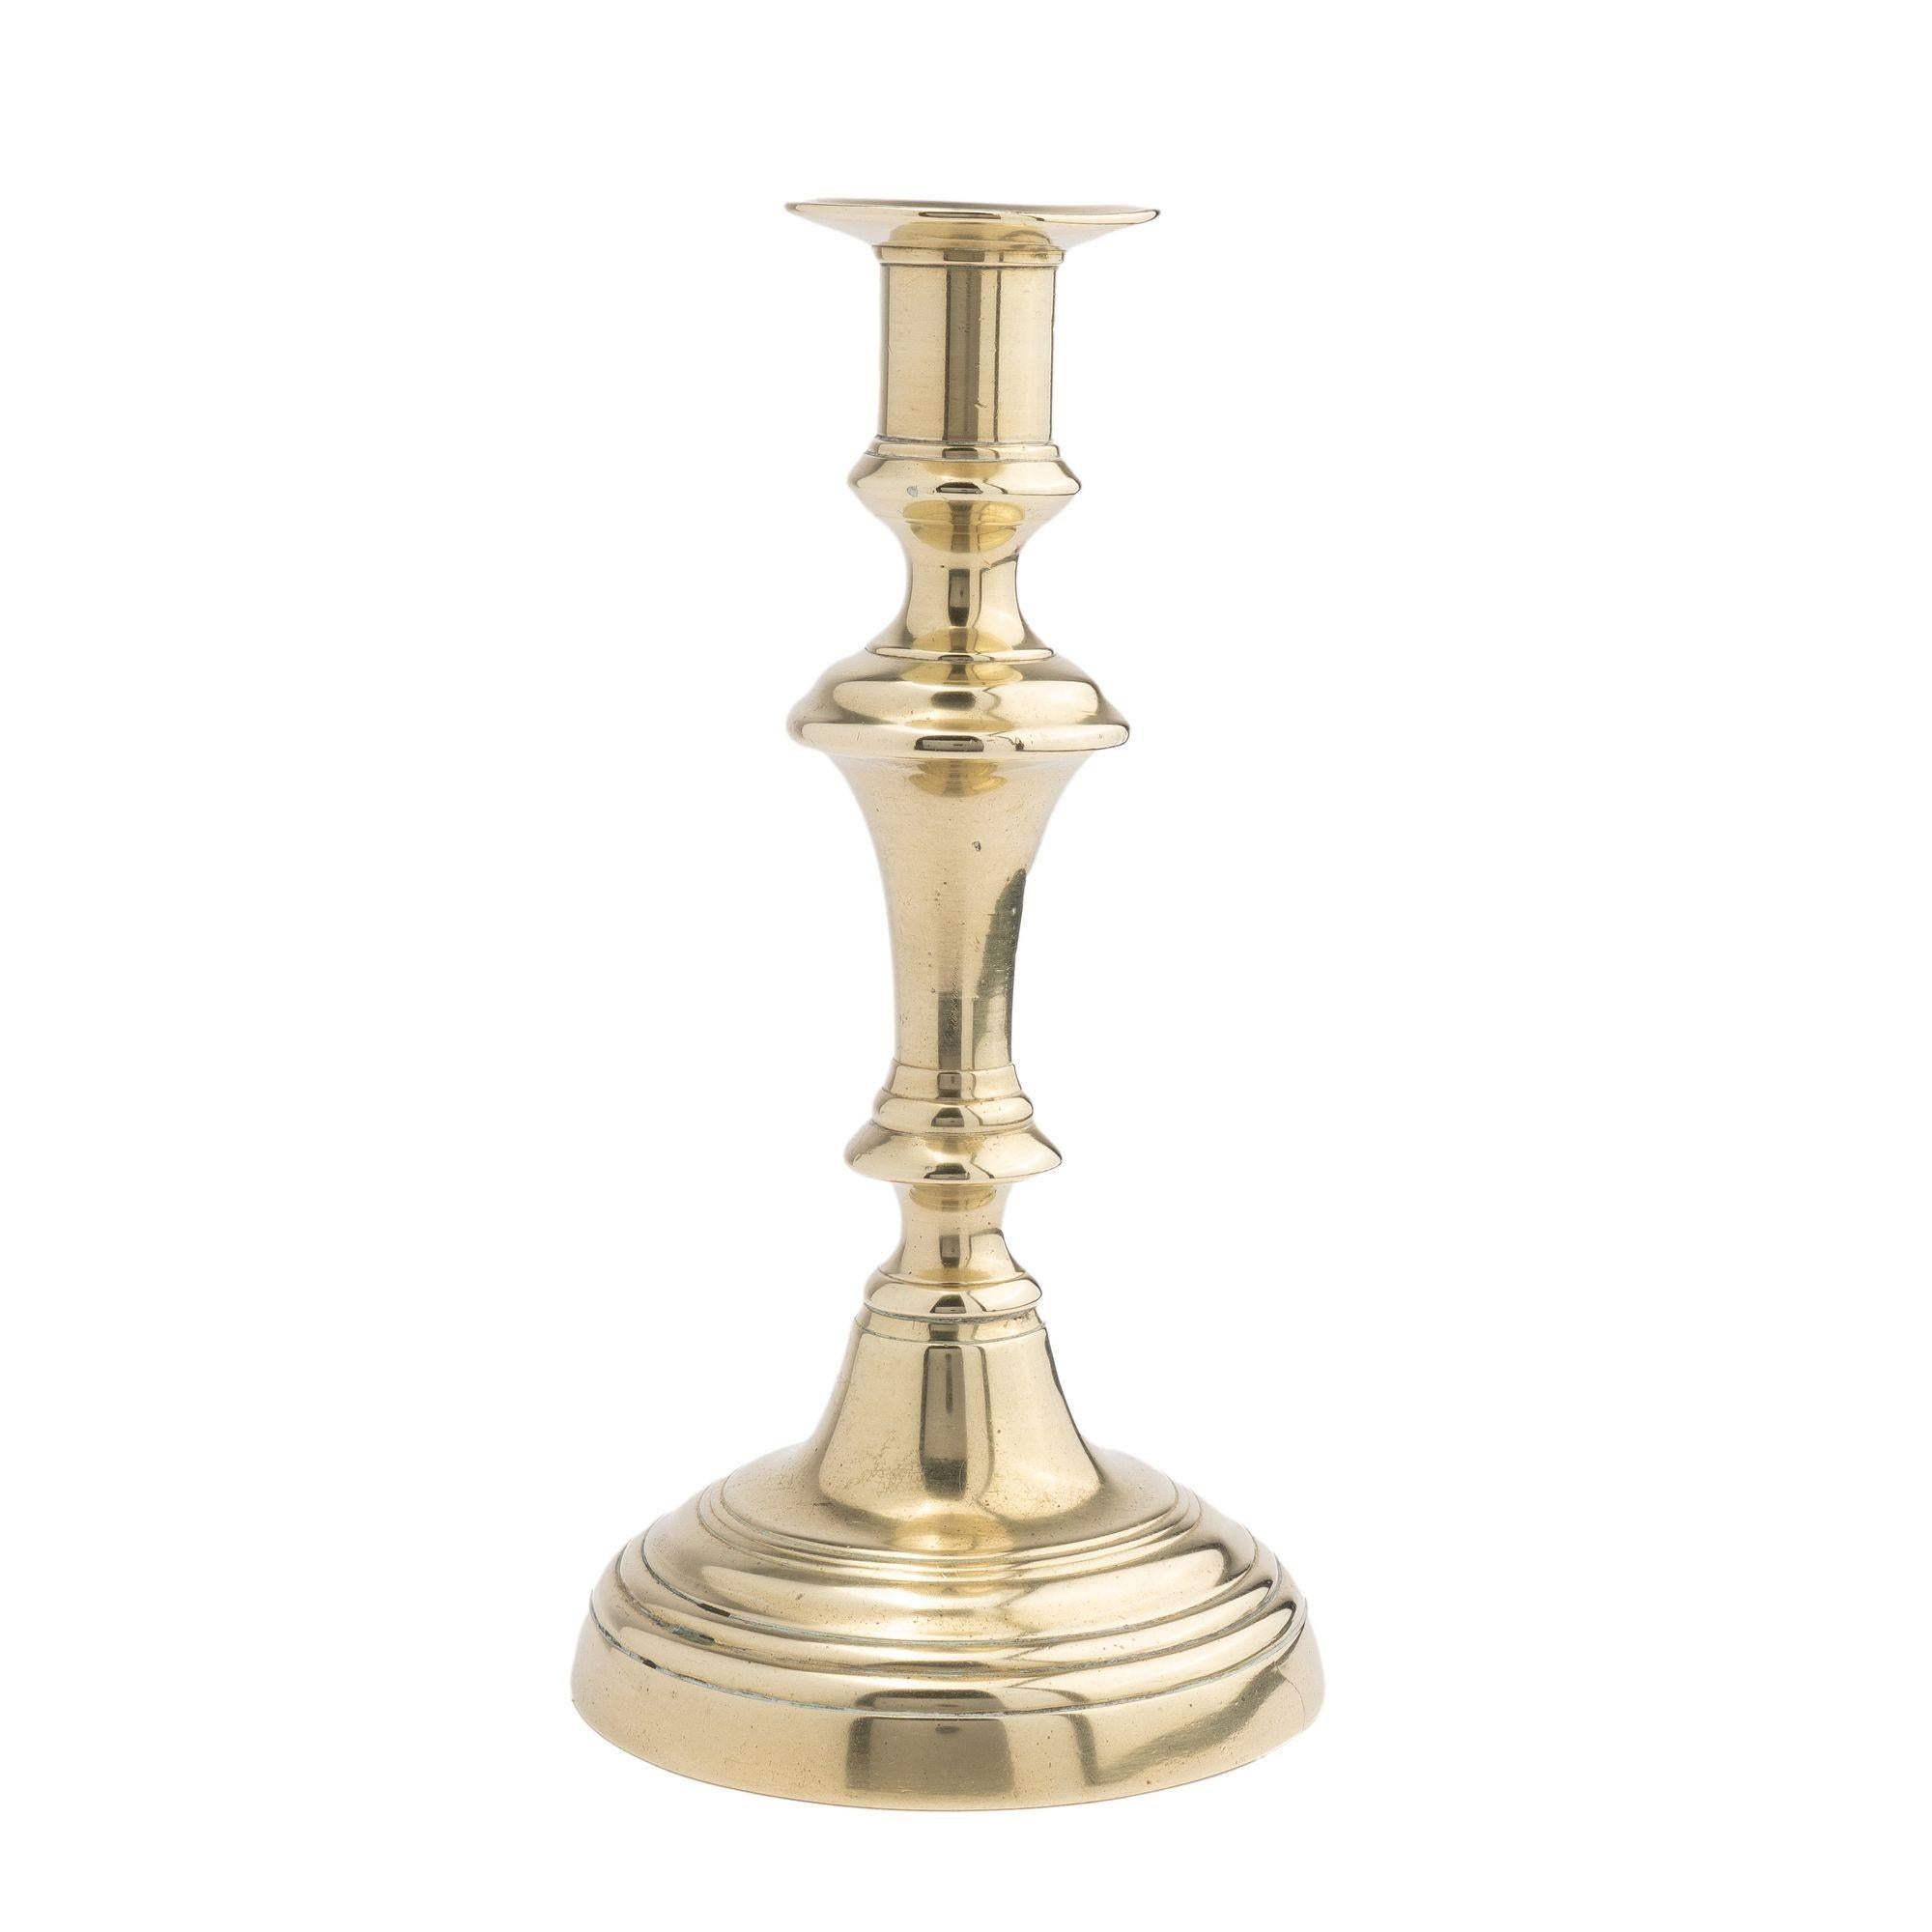 Cast brass circular domed base Queen Anne candlestick with knob stem and internal push up candle ejector.

Birmingham, England, circa 1770.